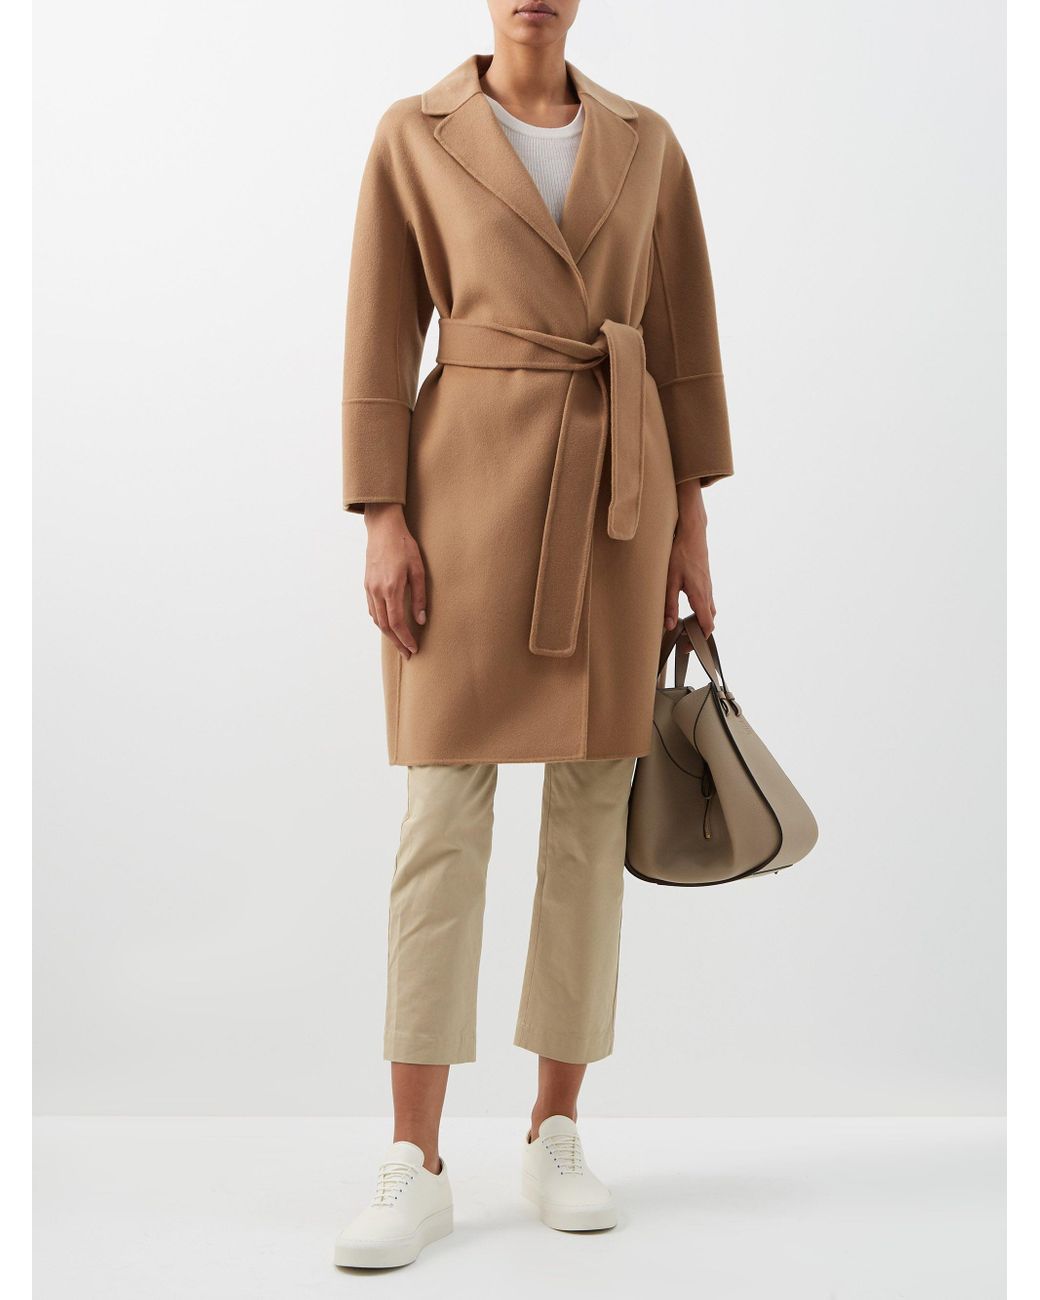 Weekend by Maxmara Lavagna Jacket in Natural | Lyst